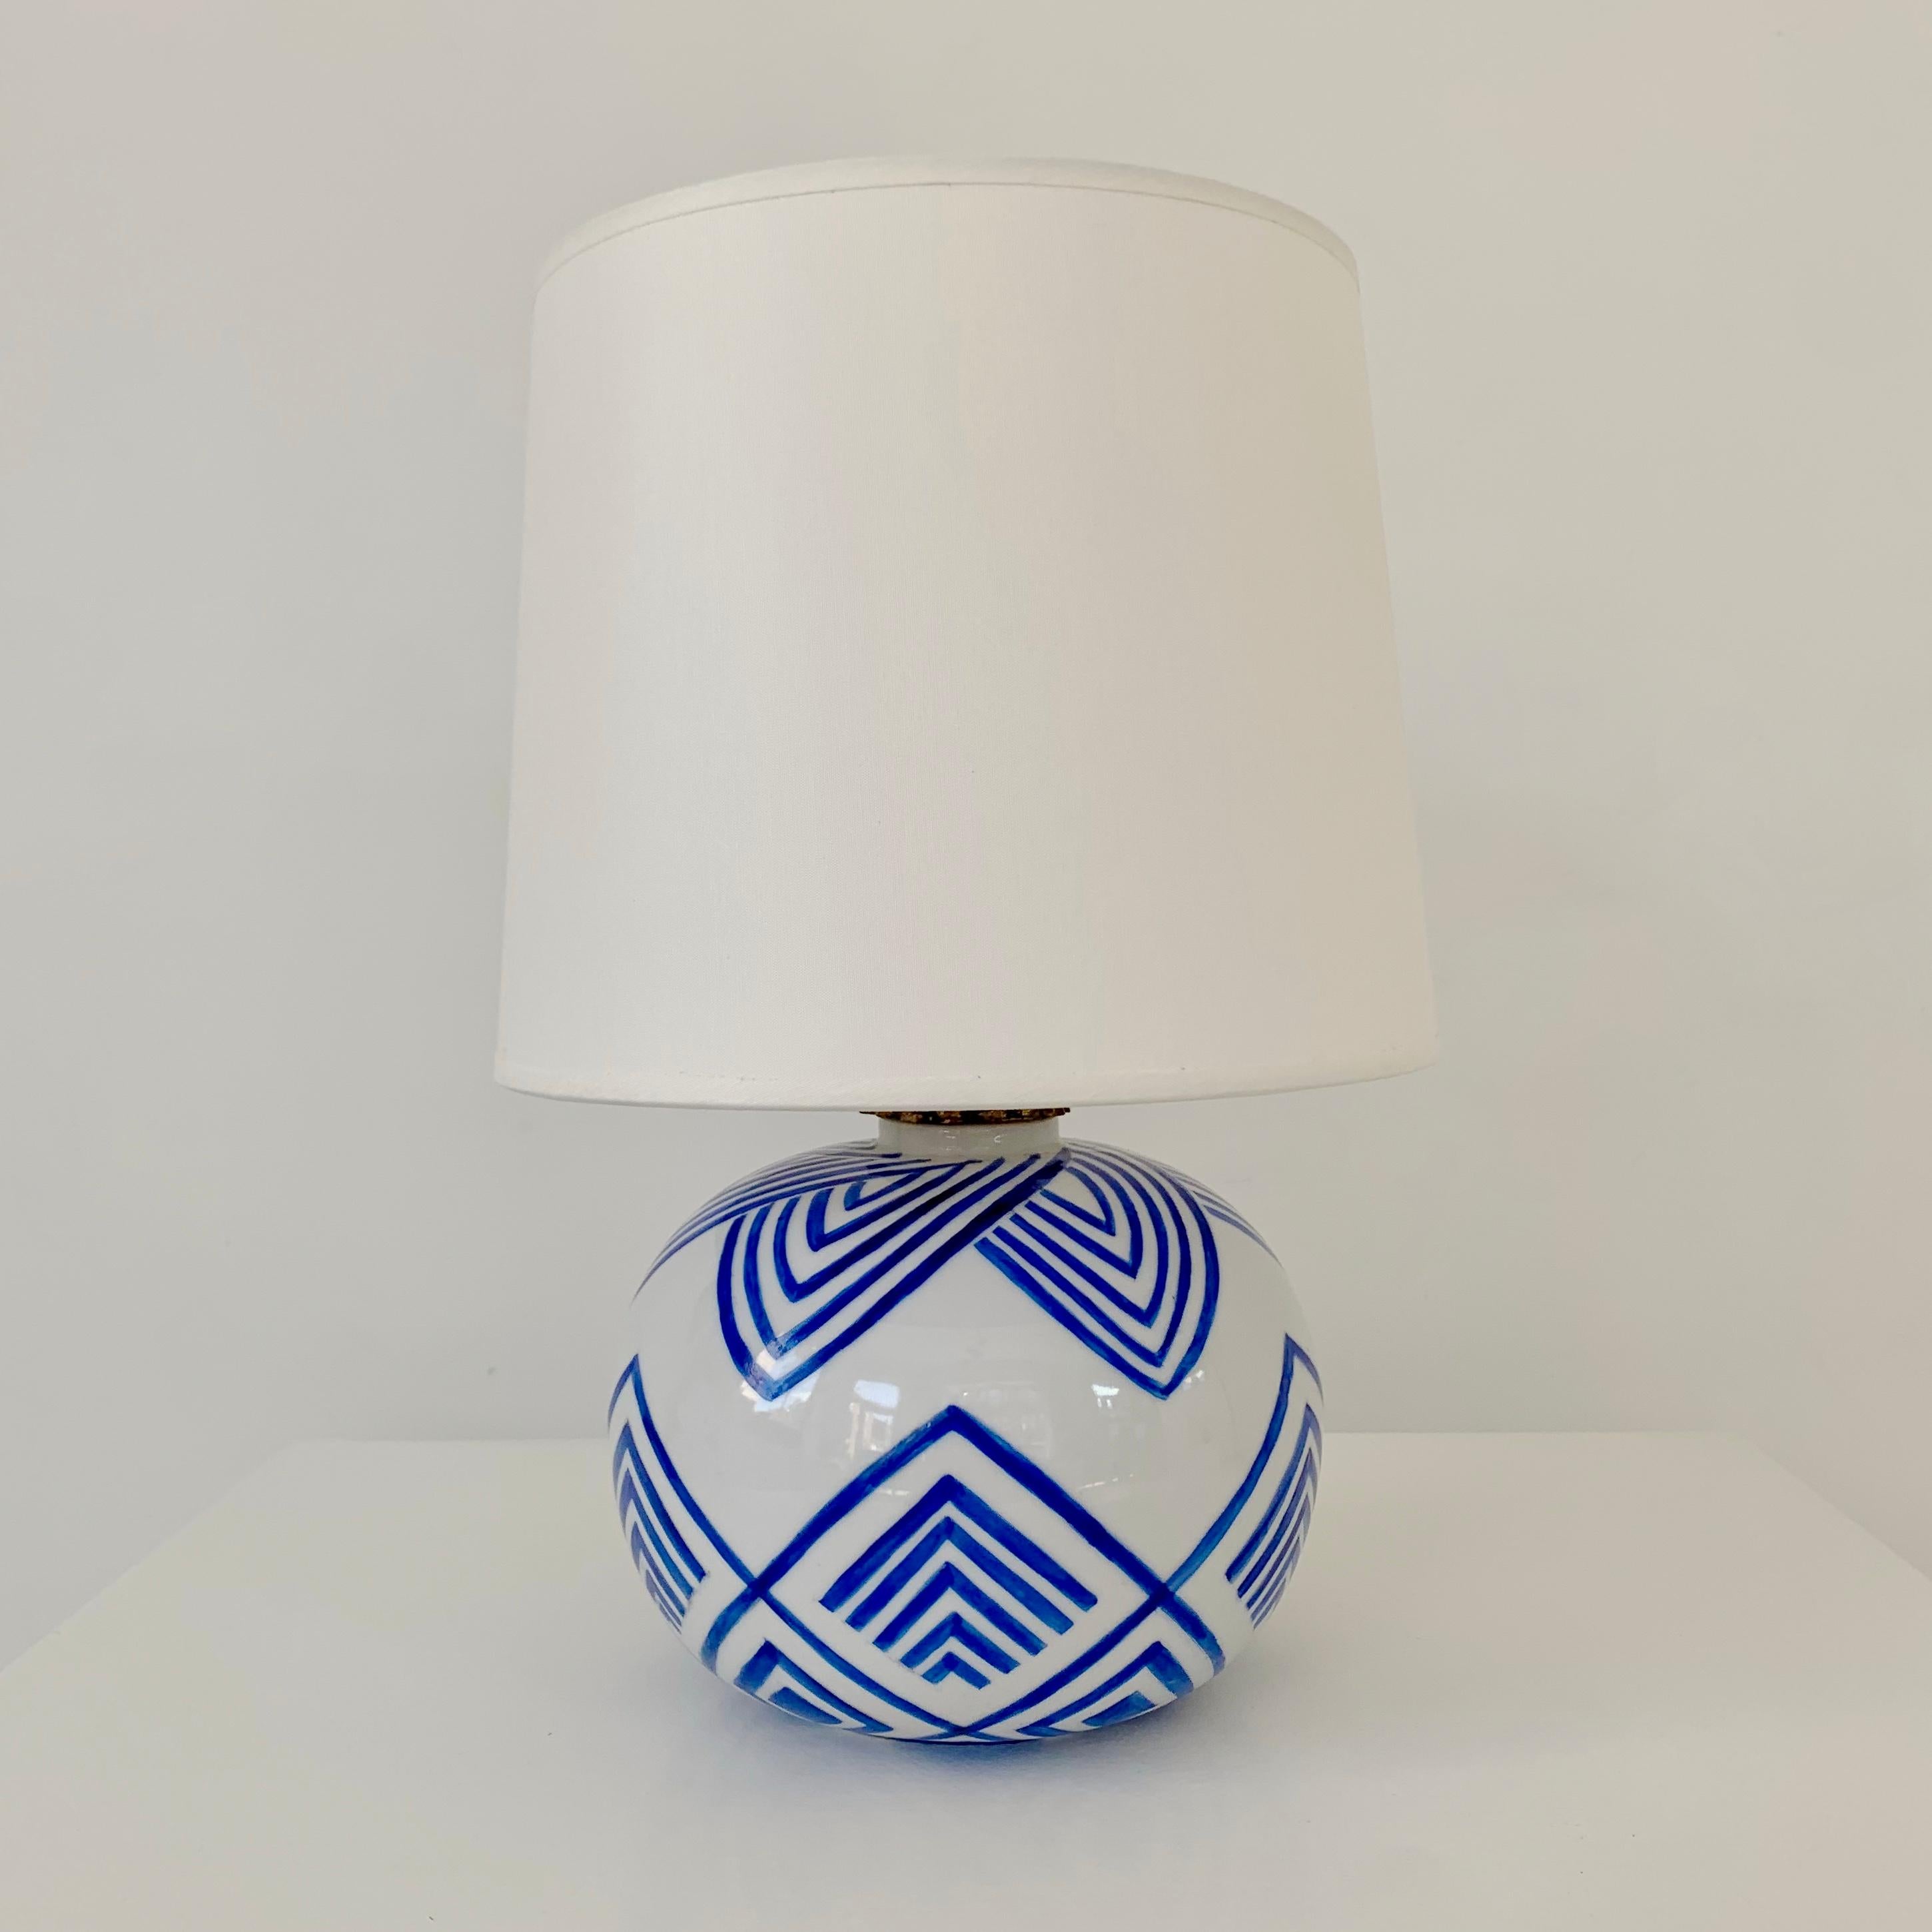 Mid-Century Modern Mid-Century White and Blue Decorative Table Lamp, 1929, France.